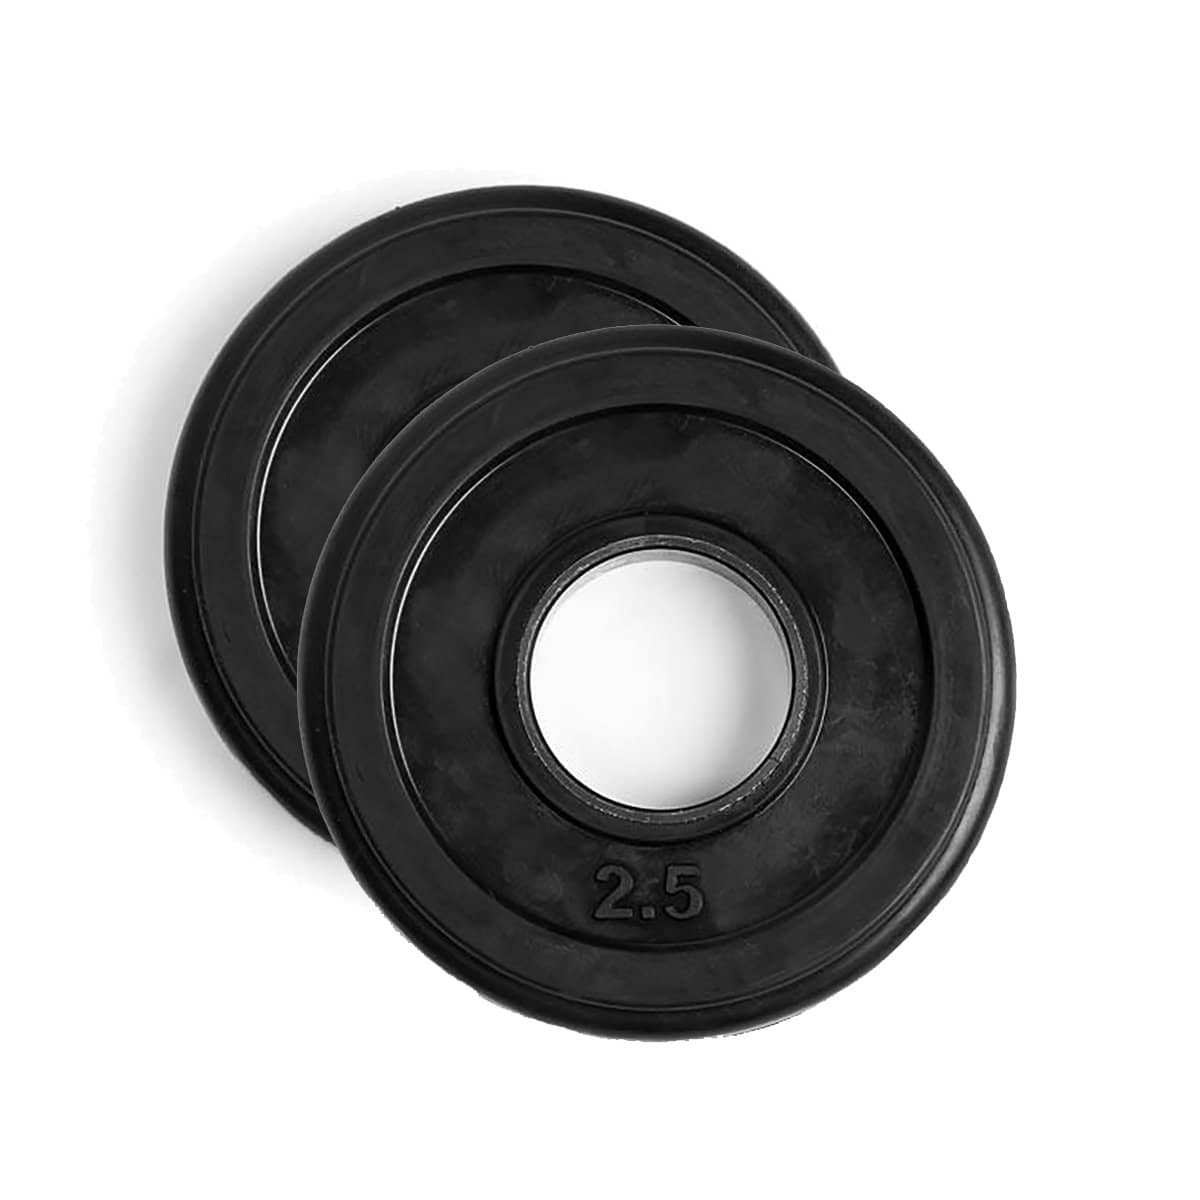 2.5lb Pair - Black Rubber Coated Olympic Plates.